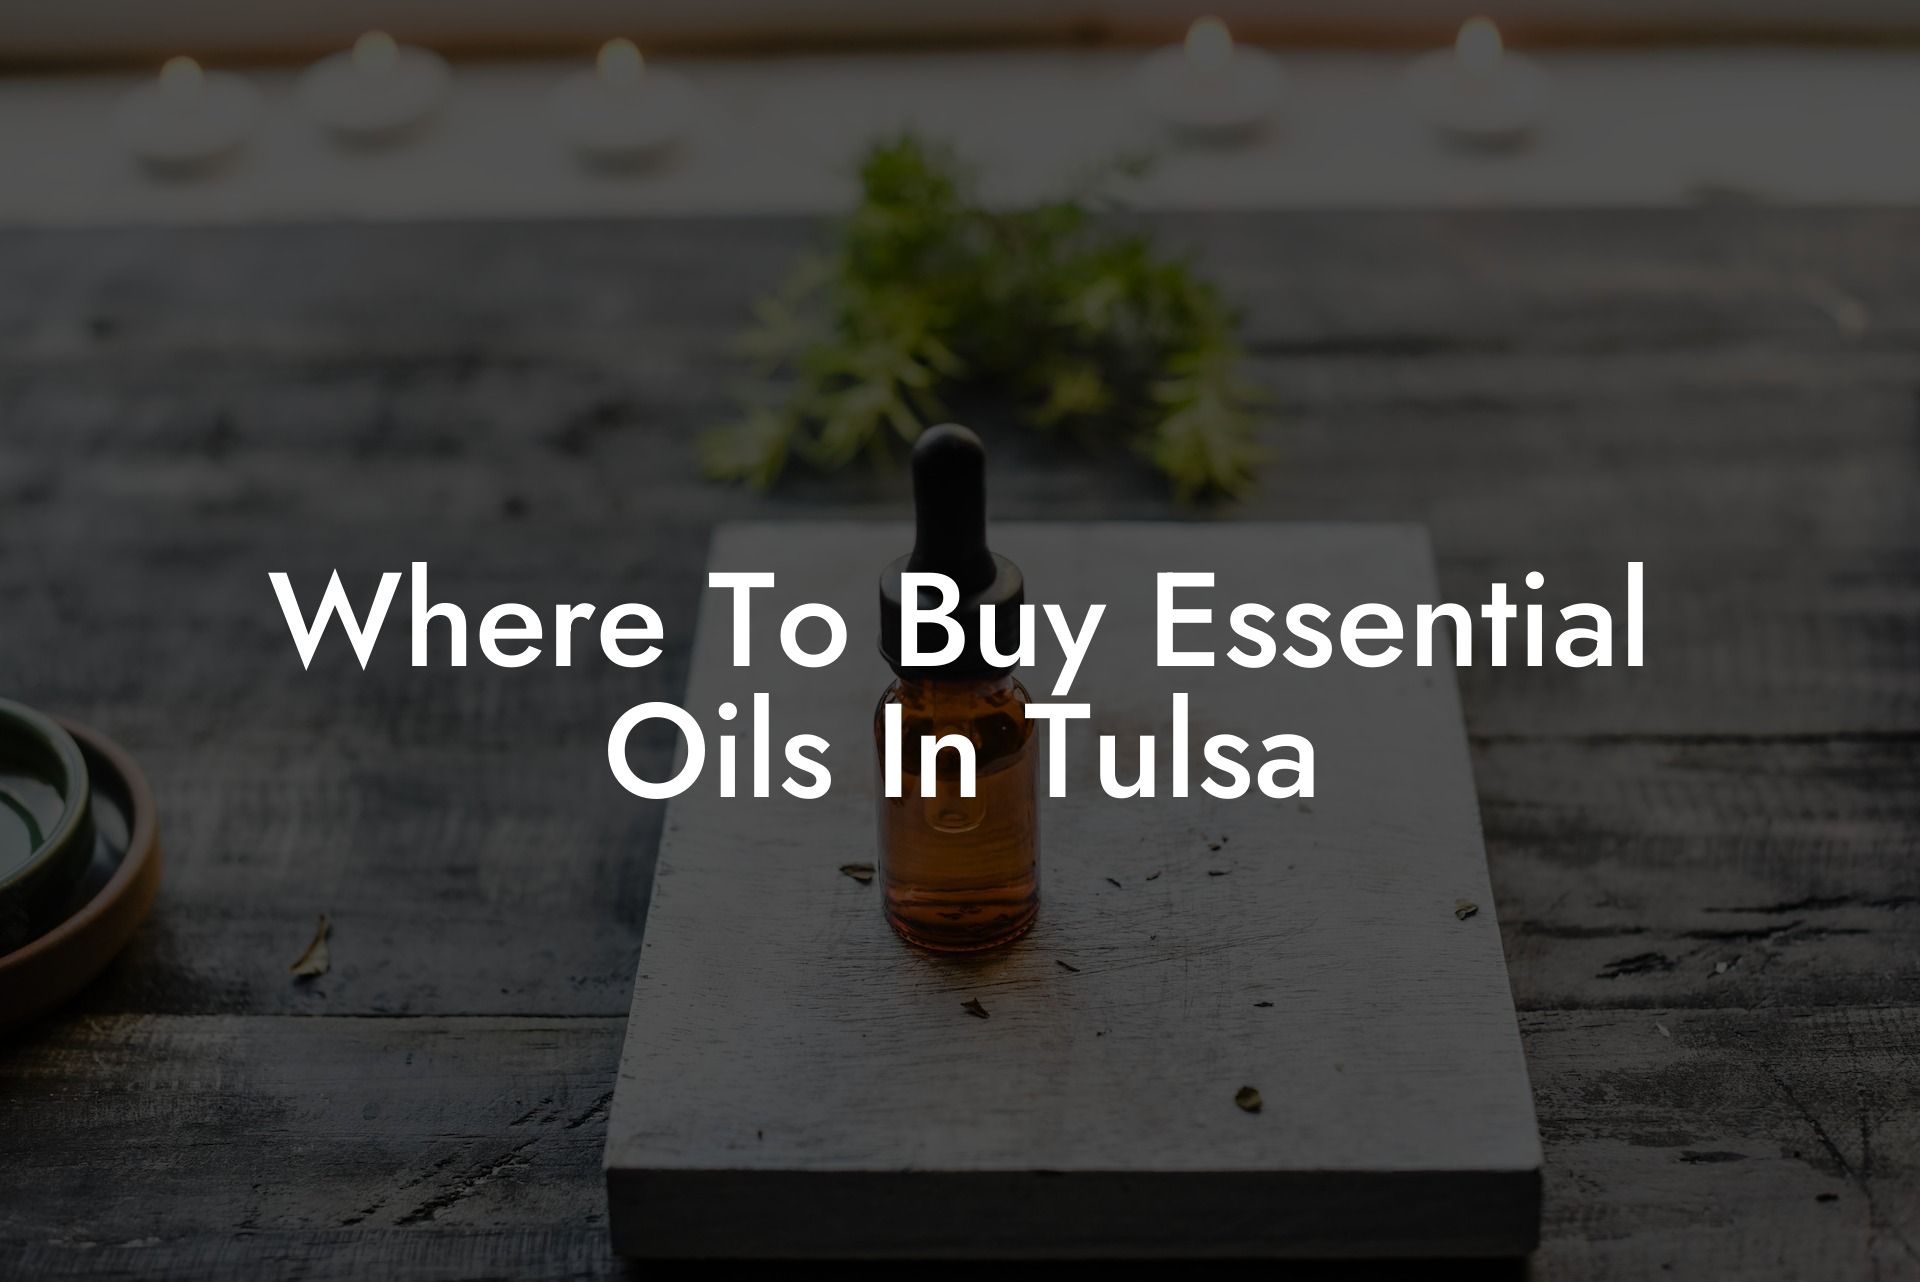 Where To Buy Essential Oils In Tulsa